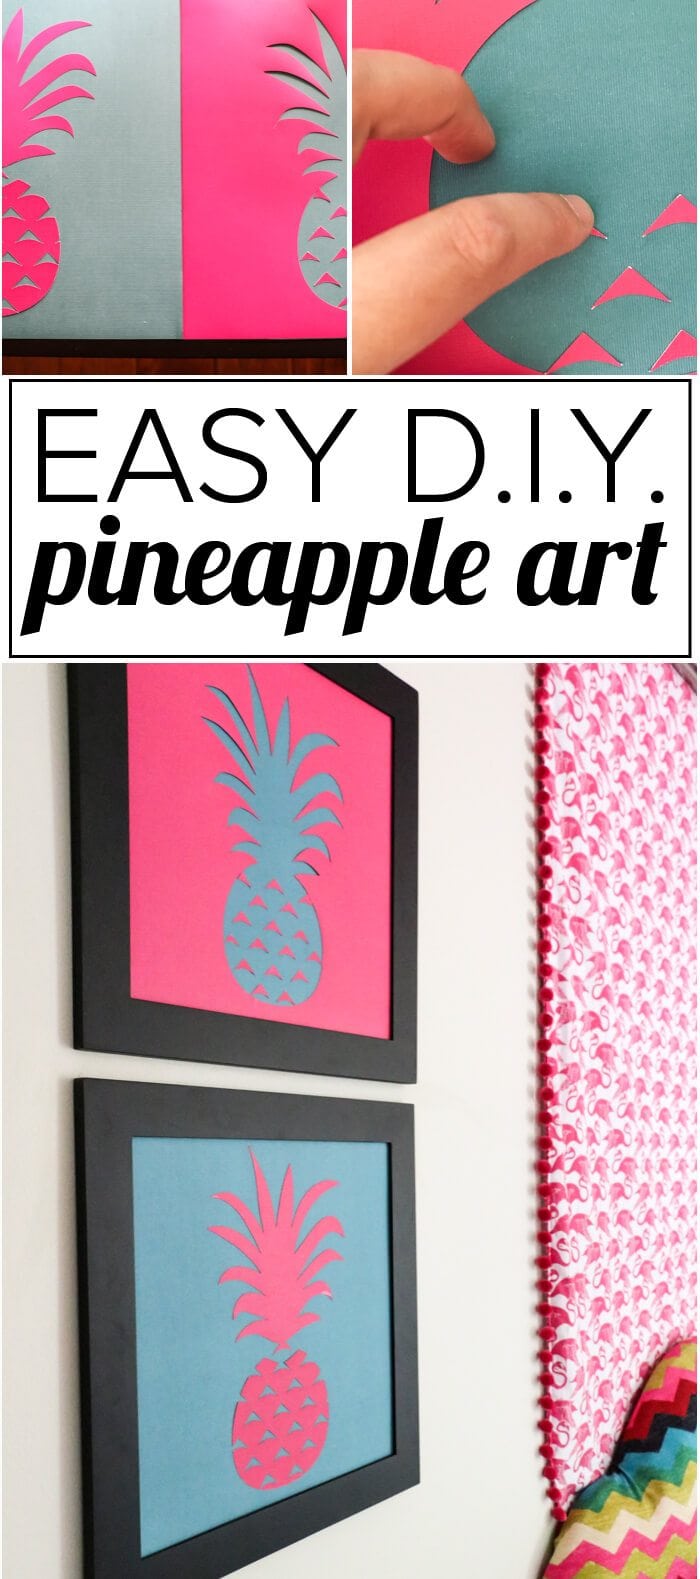 OMG, love this DIY pineapple art so much. And it actually looks super easy to make!